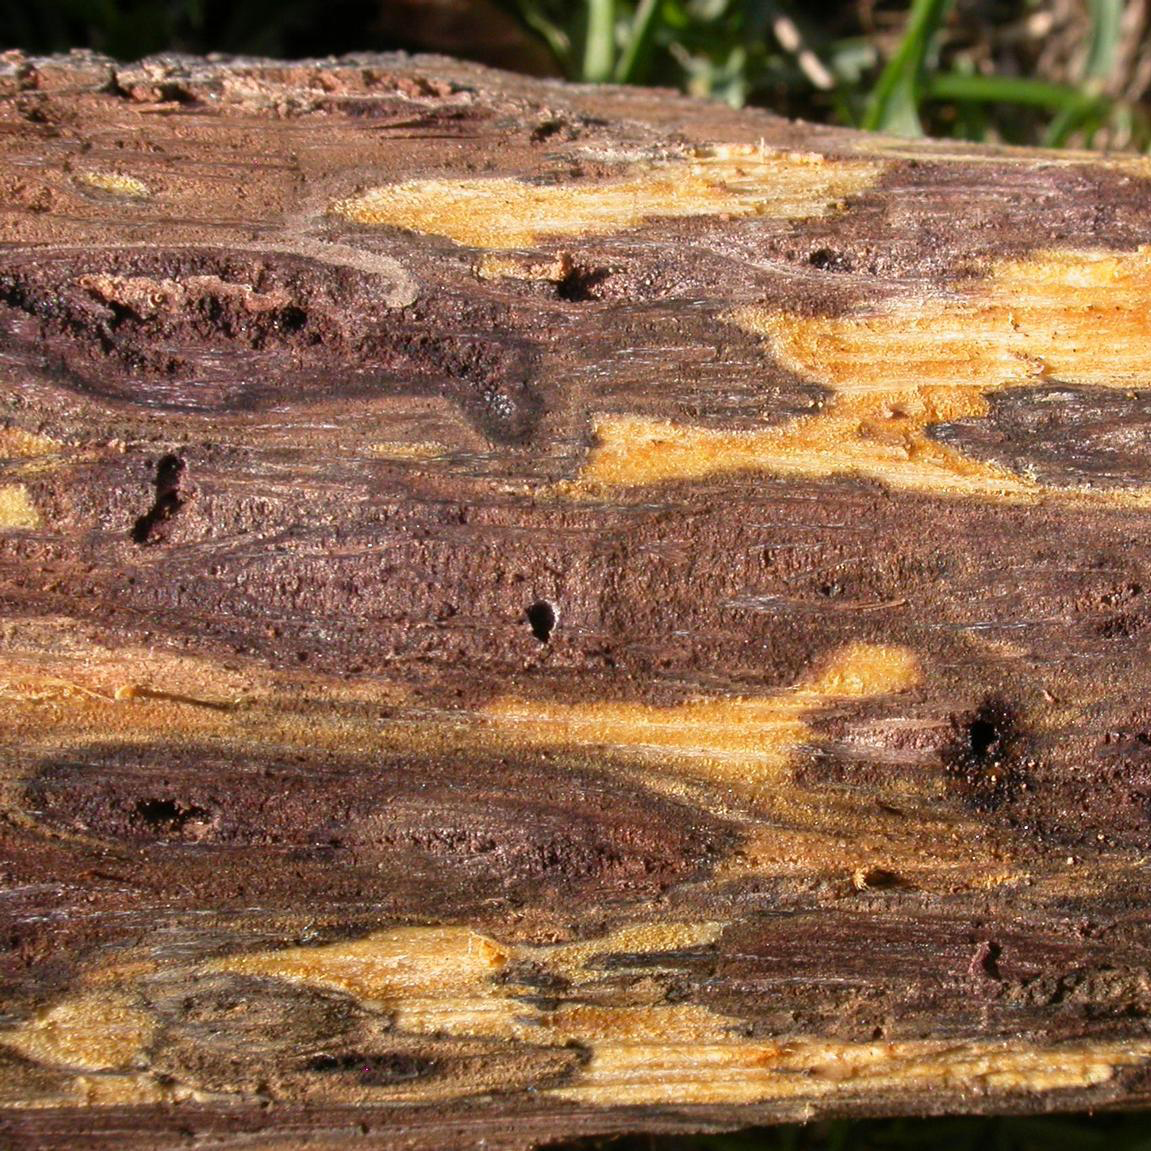 Surveys To Assess Potential For Thousand Canker Disease On Illinois - surveys to assess potential for thousand canker disease on illinois walnut trees